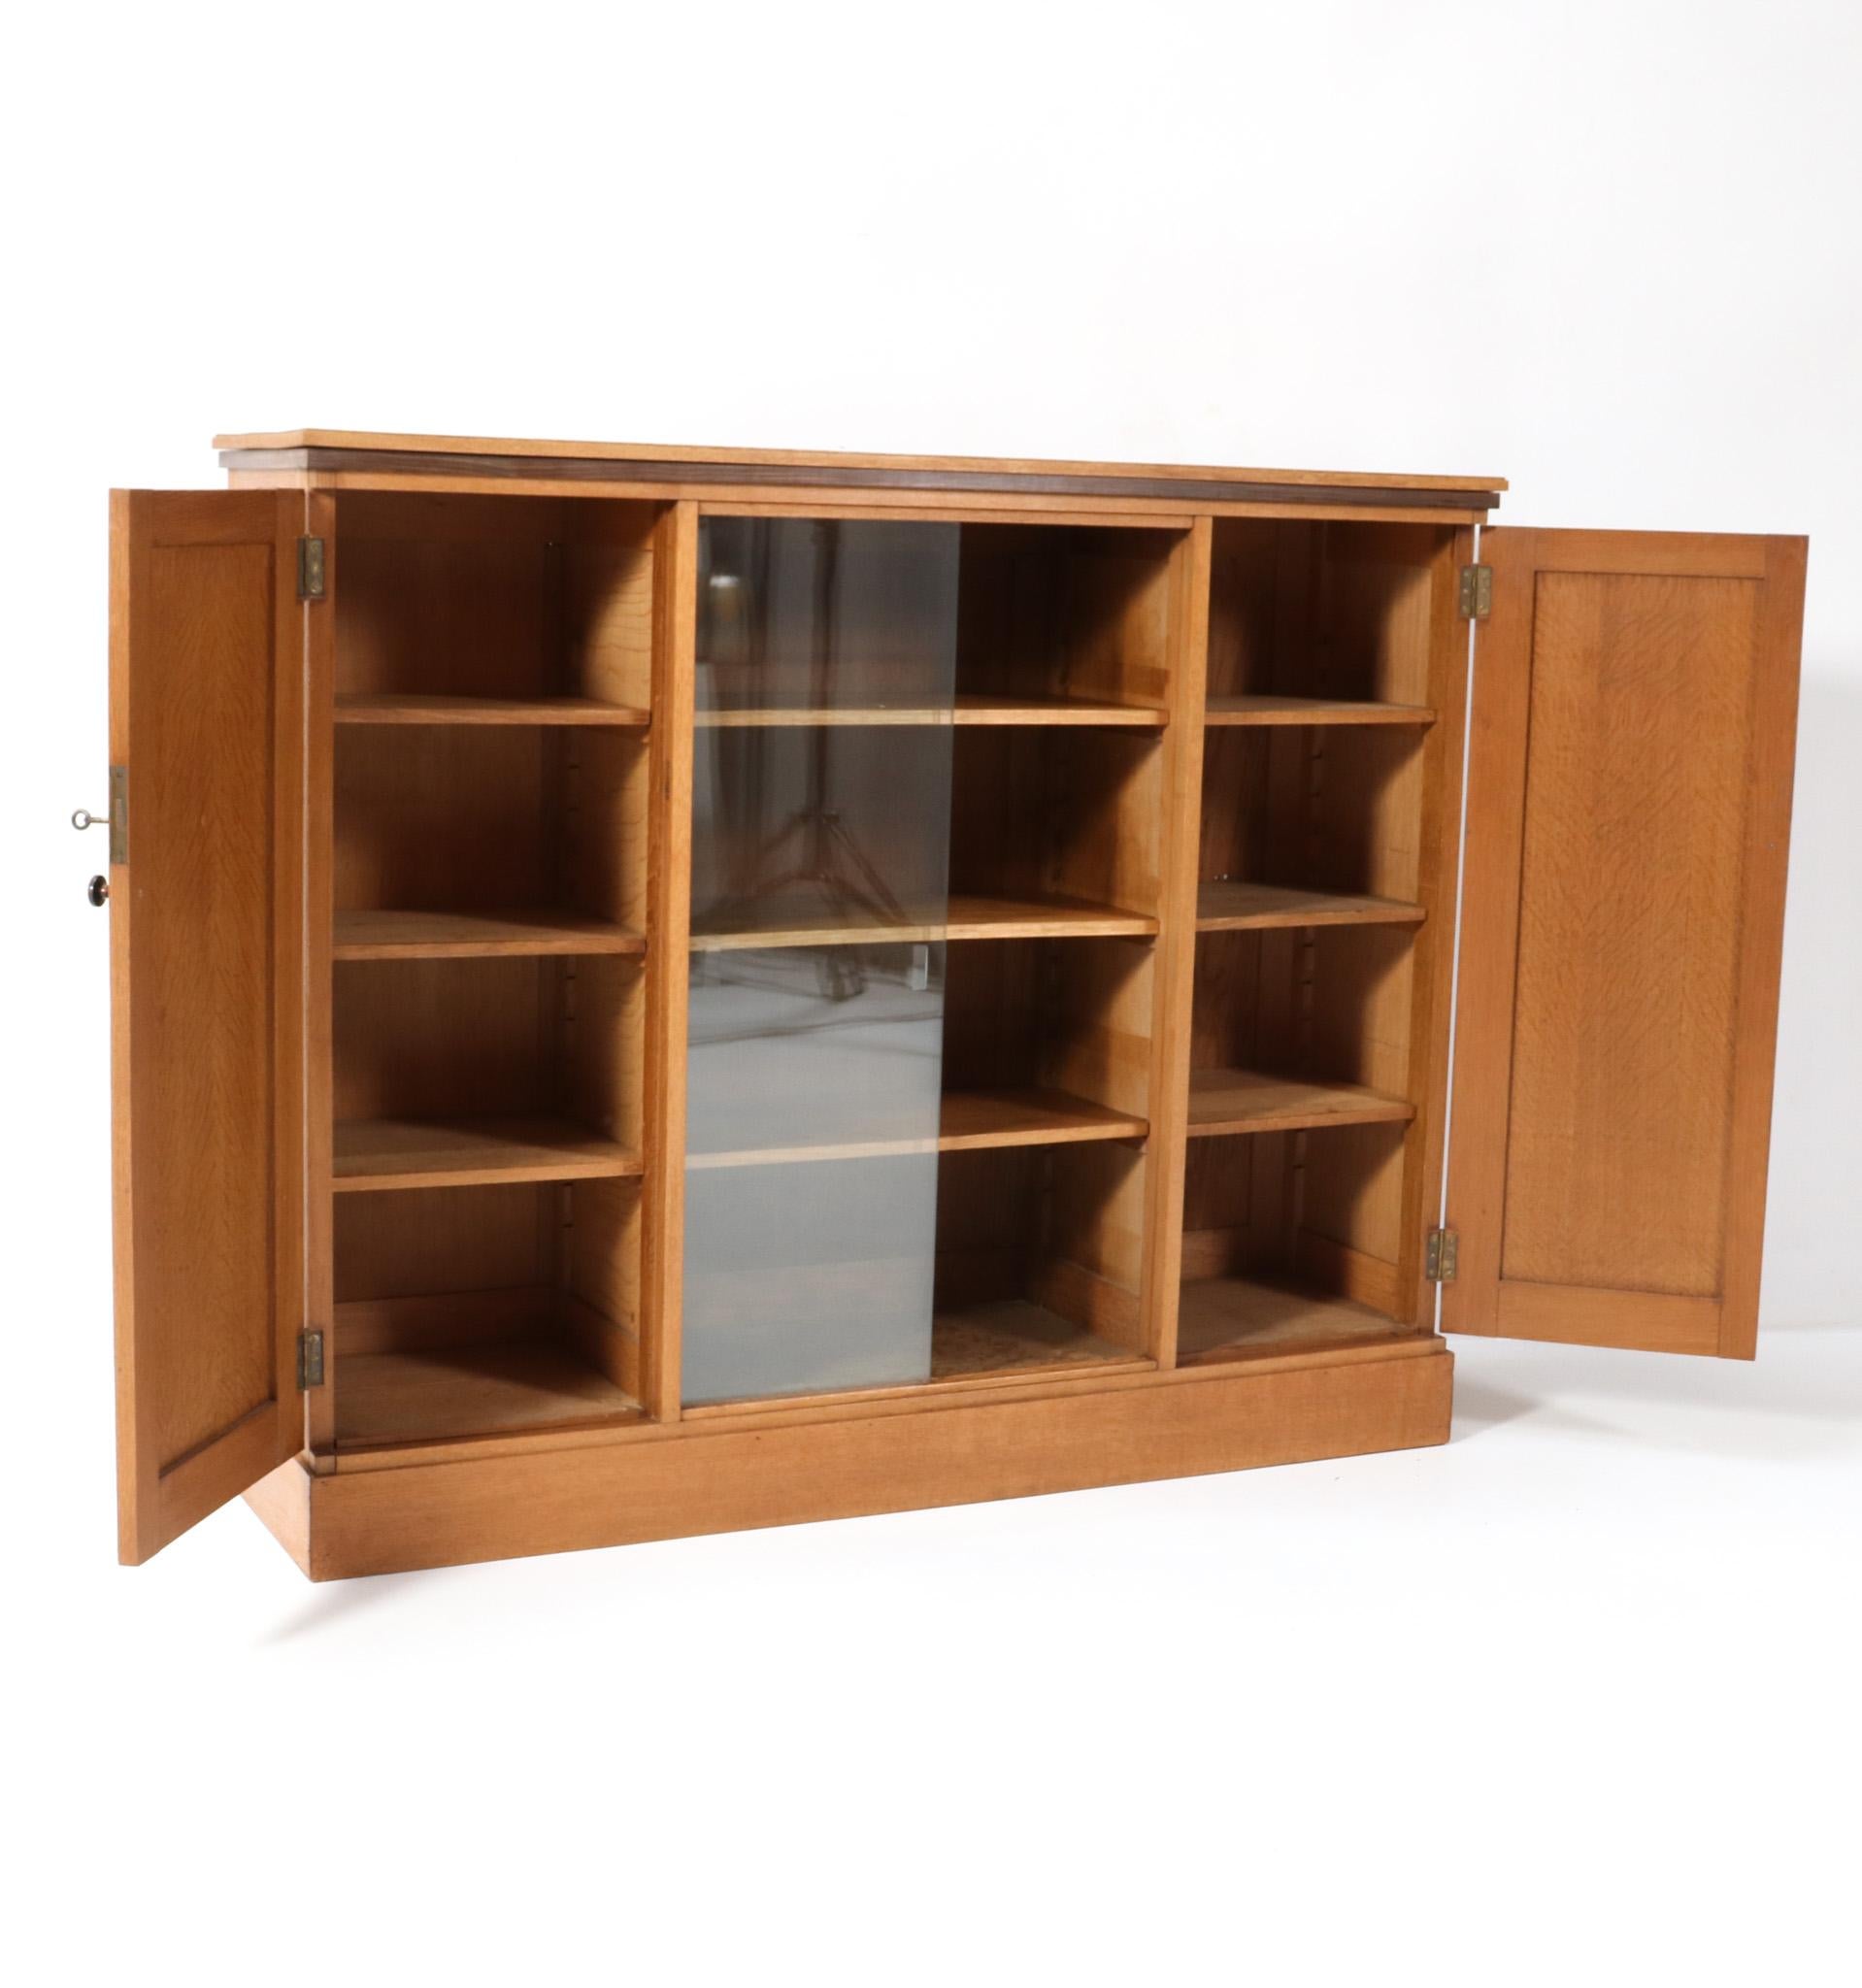 Oak Art Deco Modernist Bookcase with Glass Sliding Doors, 1920s In Good Condition For Sale In Amsterdam, NL